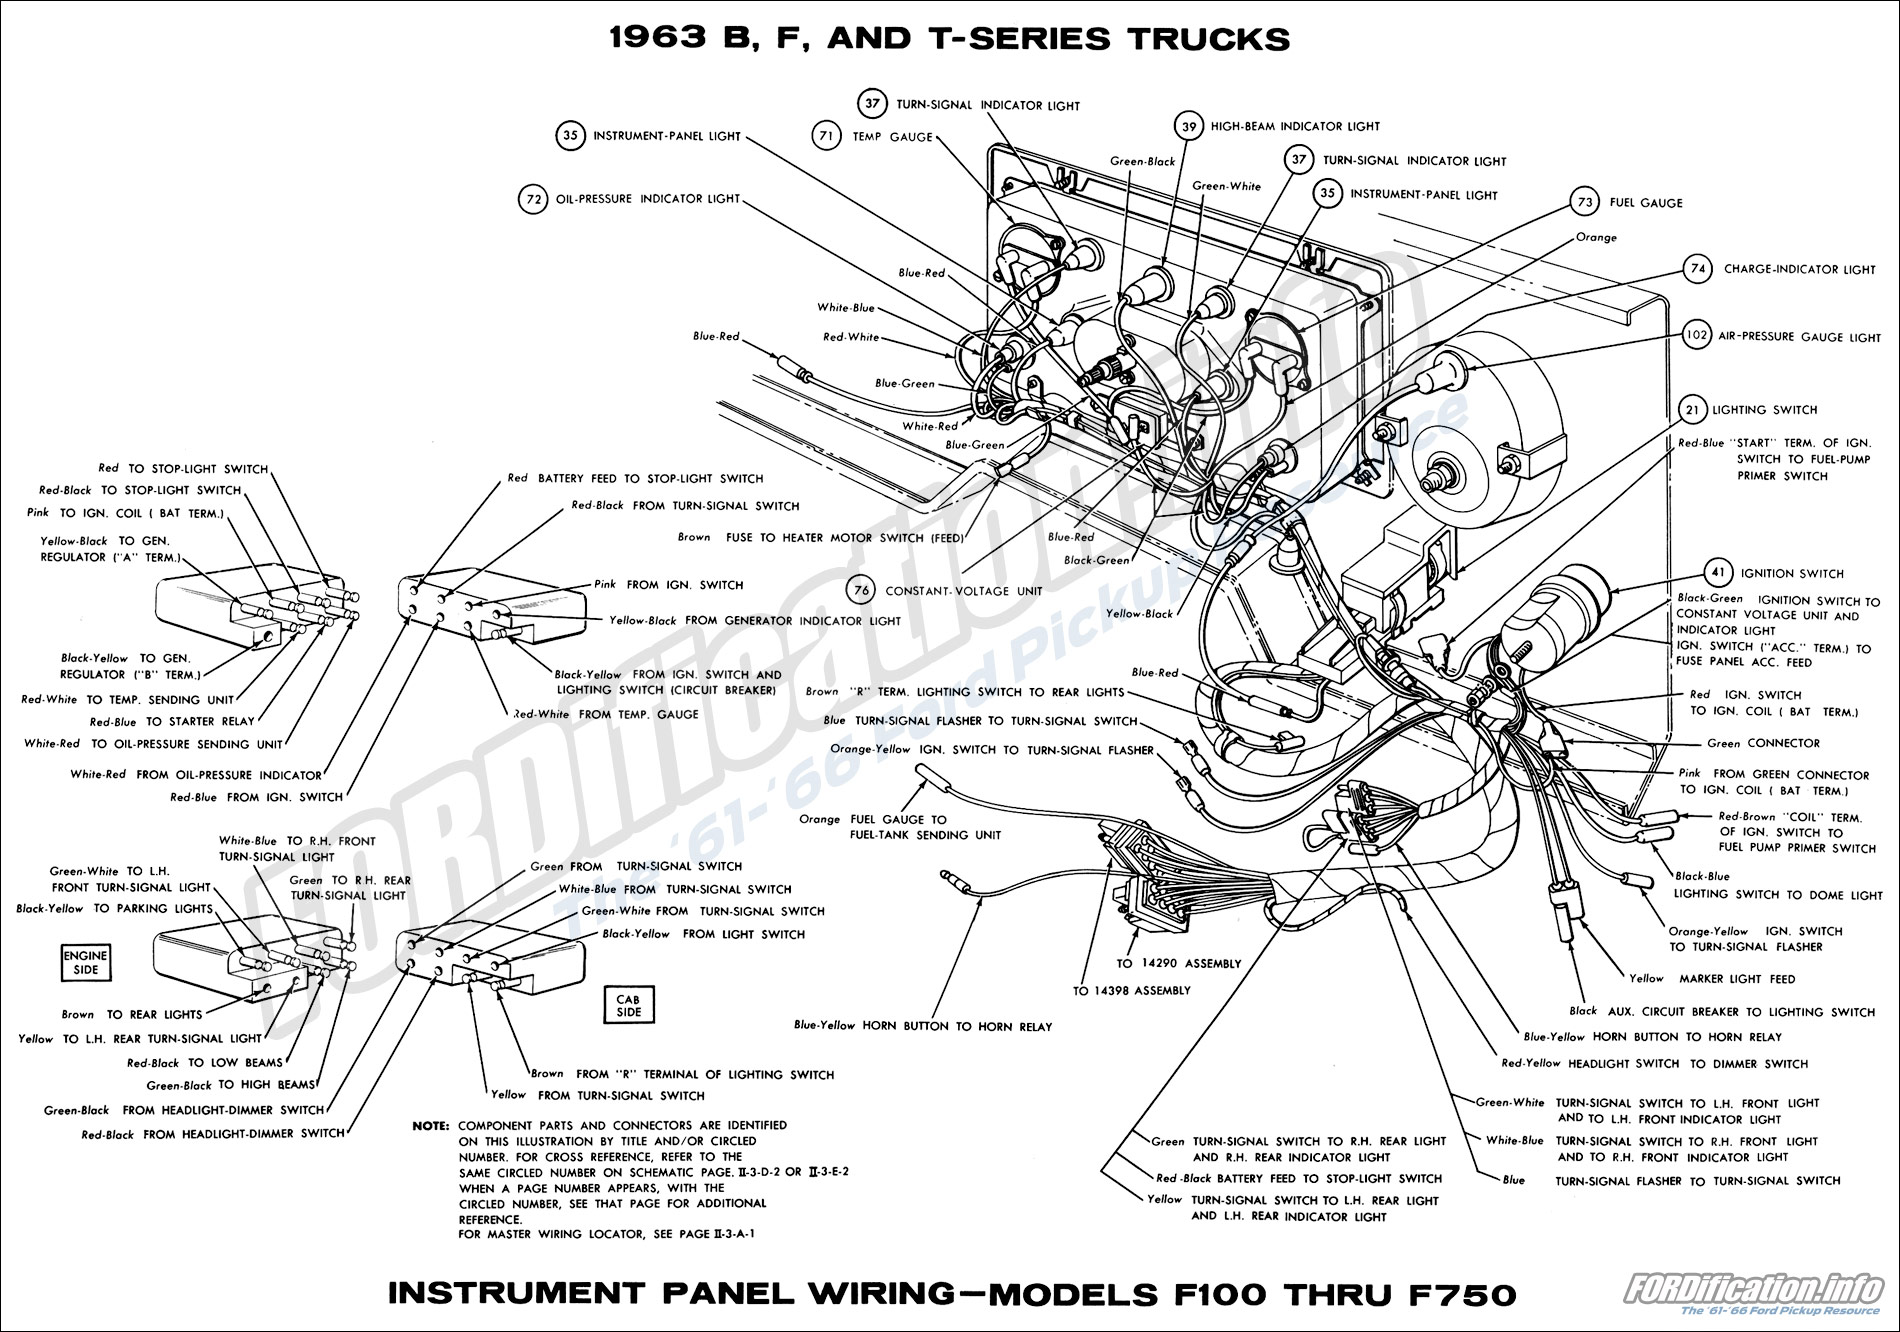 1978 Ford Truck Wiring Diagram from fordification.info